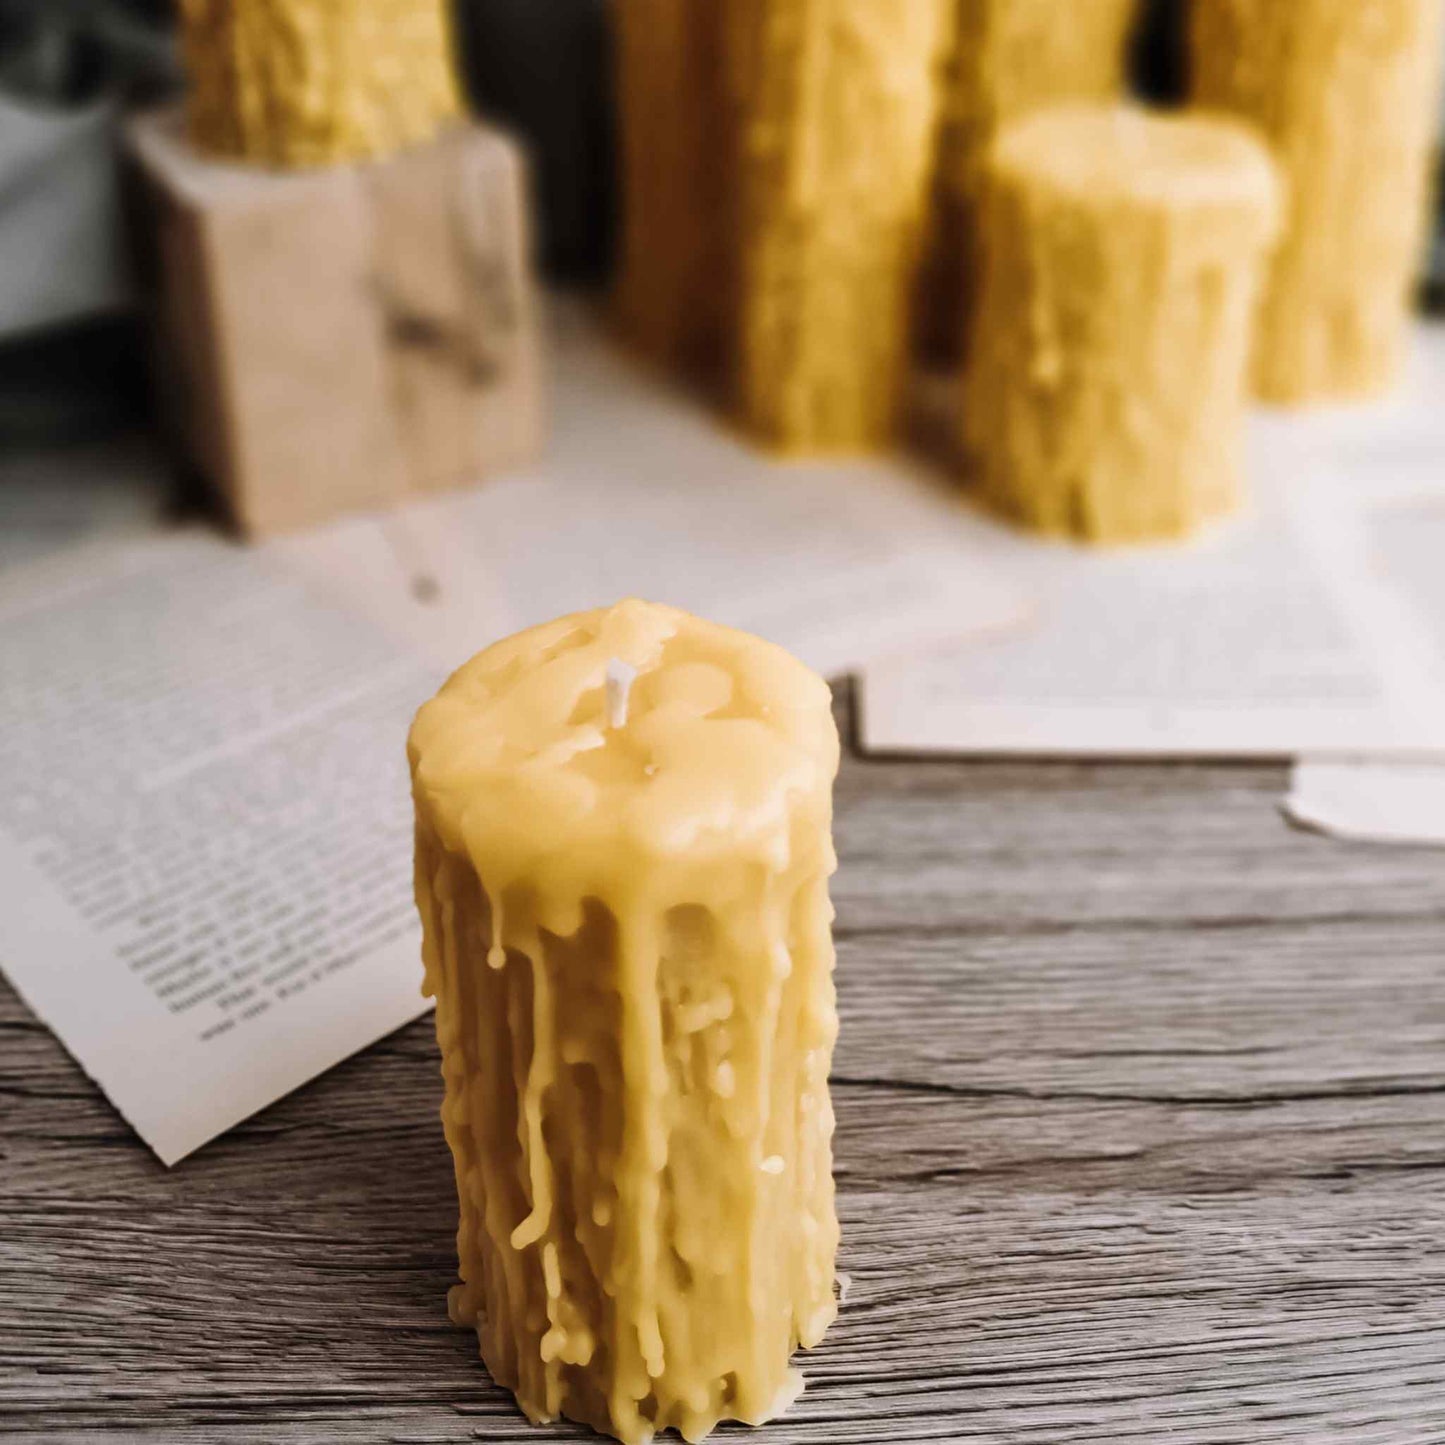 Detailed guide on beeswax candles, featuring their natural bloom, alongside tips for maximizing burn time and care instructions